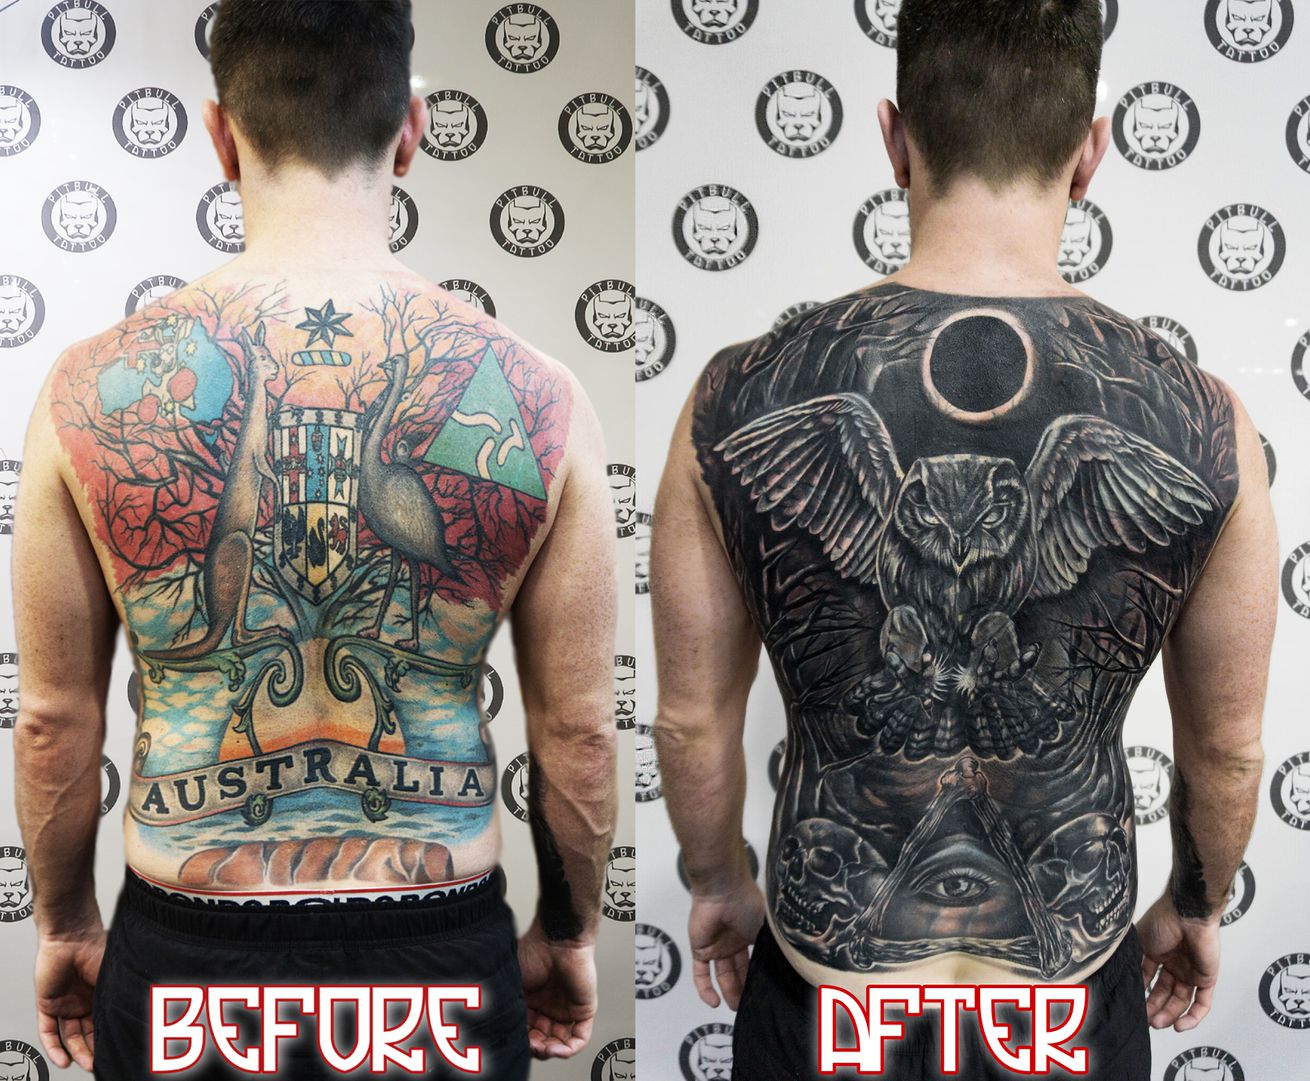 Tattooing colour over black tattoos  BME Tattoo Piercing and Body  Modification NewsBME Tattoo Piercing and Body Modification News